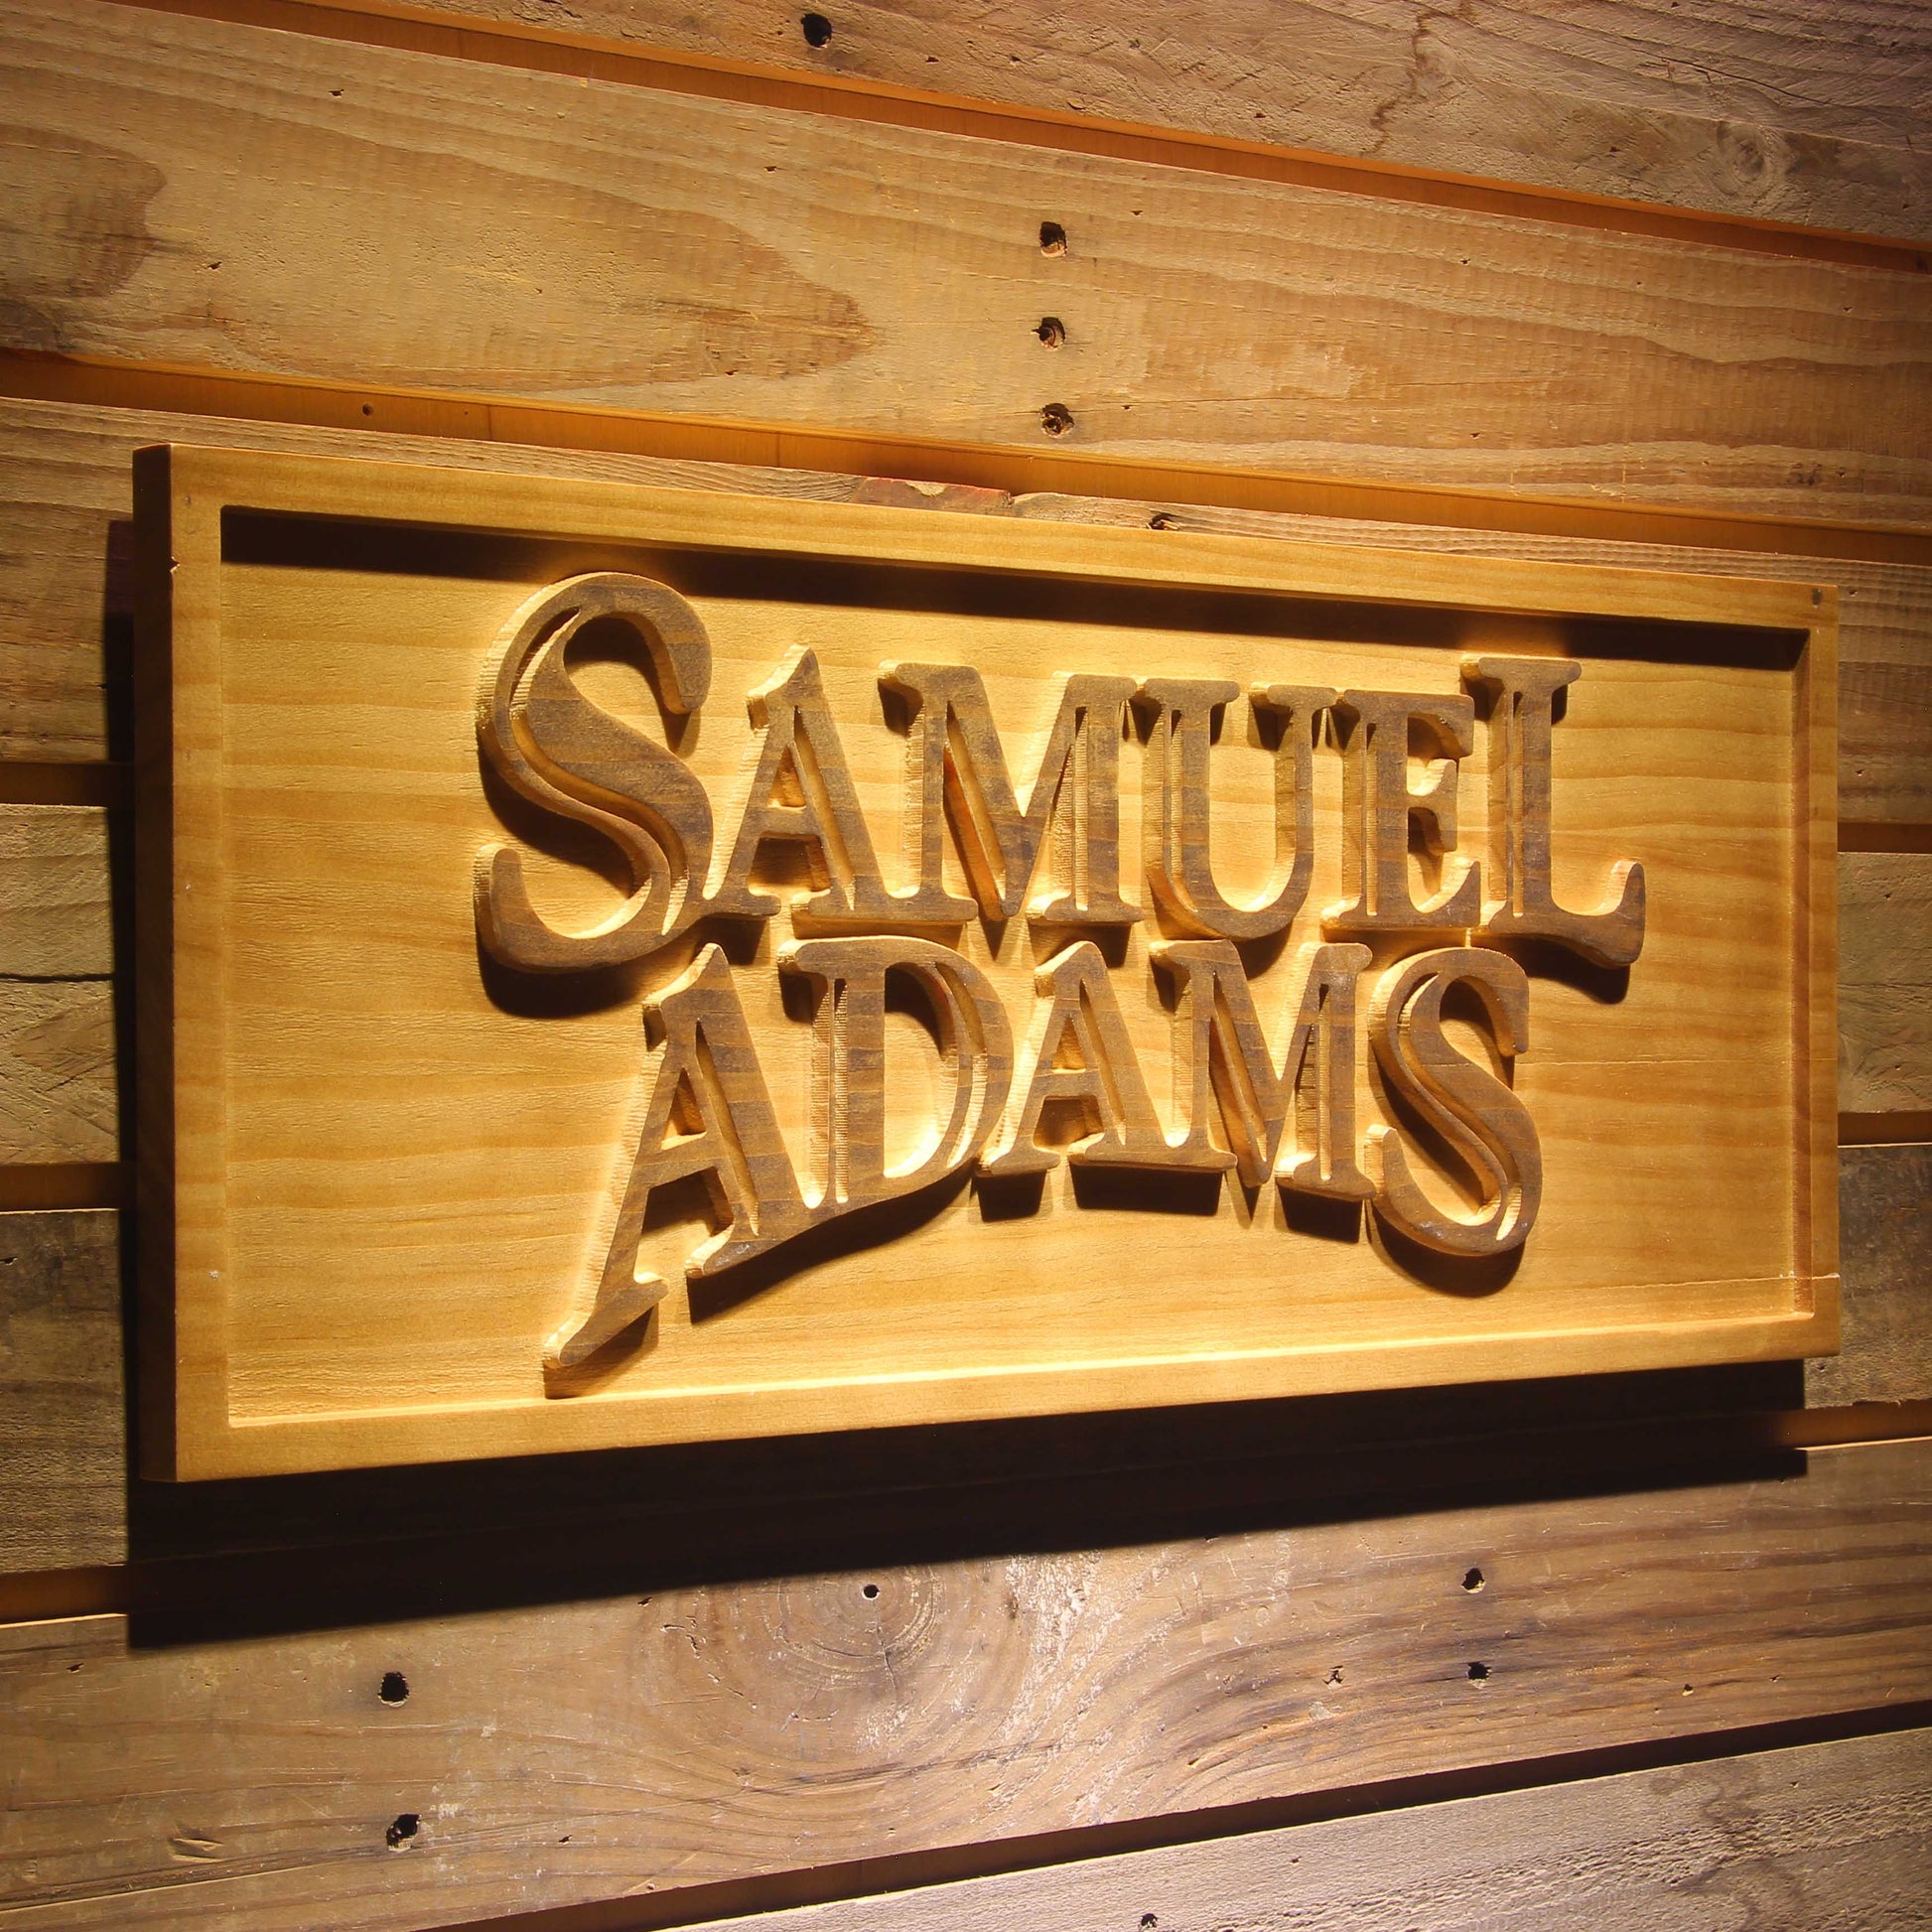 Samuel Adams 3D Wooden Bar Signs by Woody Signs Co. - Handmade Crafted Unique Wooden Creative